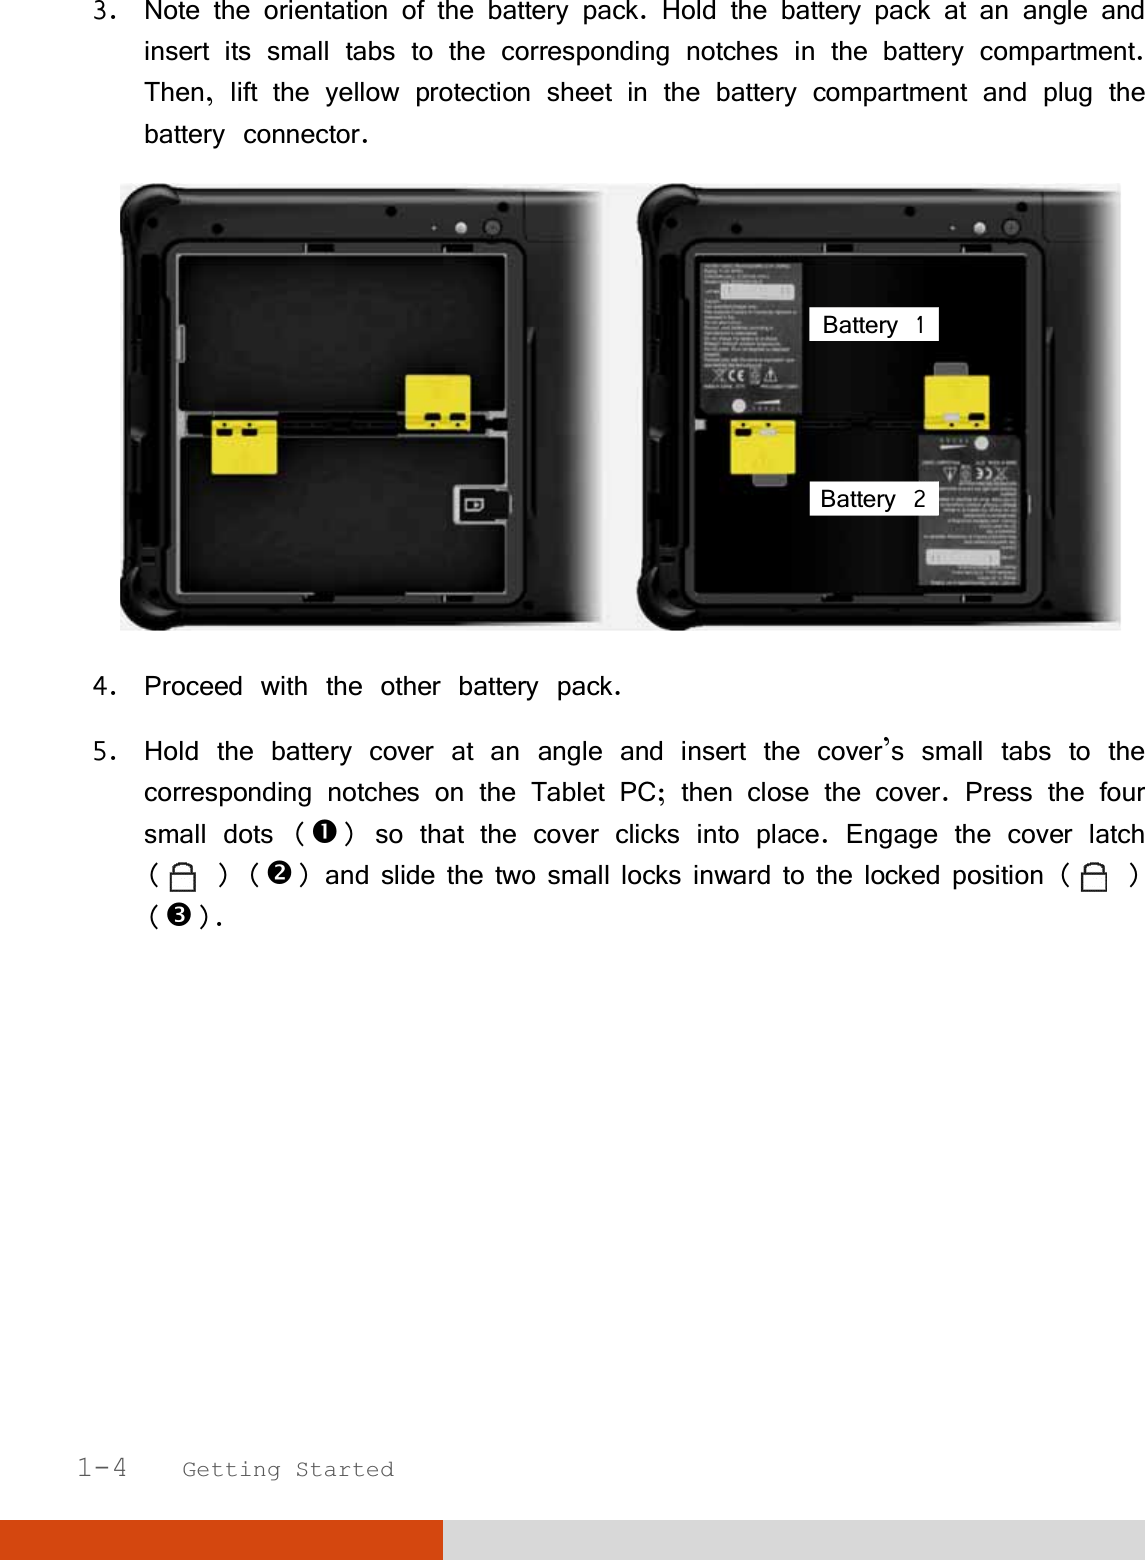   1-4   Getting Started 3. Note the orientation of the battery pack. Hold the battery pack at an angle and insert its small tabs to the corresponding notches in the battery compartment. Then, lift the yellow protection sheet in the battery compartment and plug the battery connector.  4. Proceed with the other battery pack. 5. Hold the battery cover at an angle and insert the cover’s small tabs to the corresponding notches on the Tablet PC; then close the cover. Press the four small dots () so that the cover clicks into place. Engage the cover latch ( ) () and slide the two small locks inward to the locked position (   ) (). Battery 1 Battery 2 